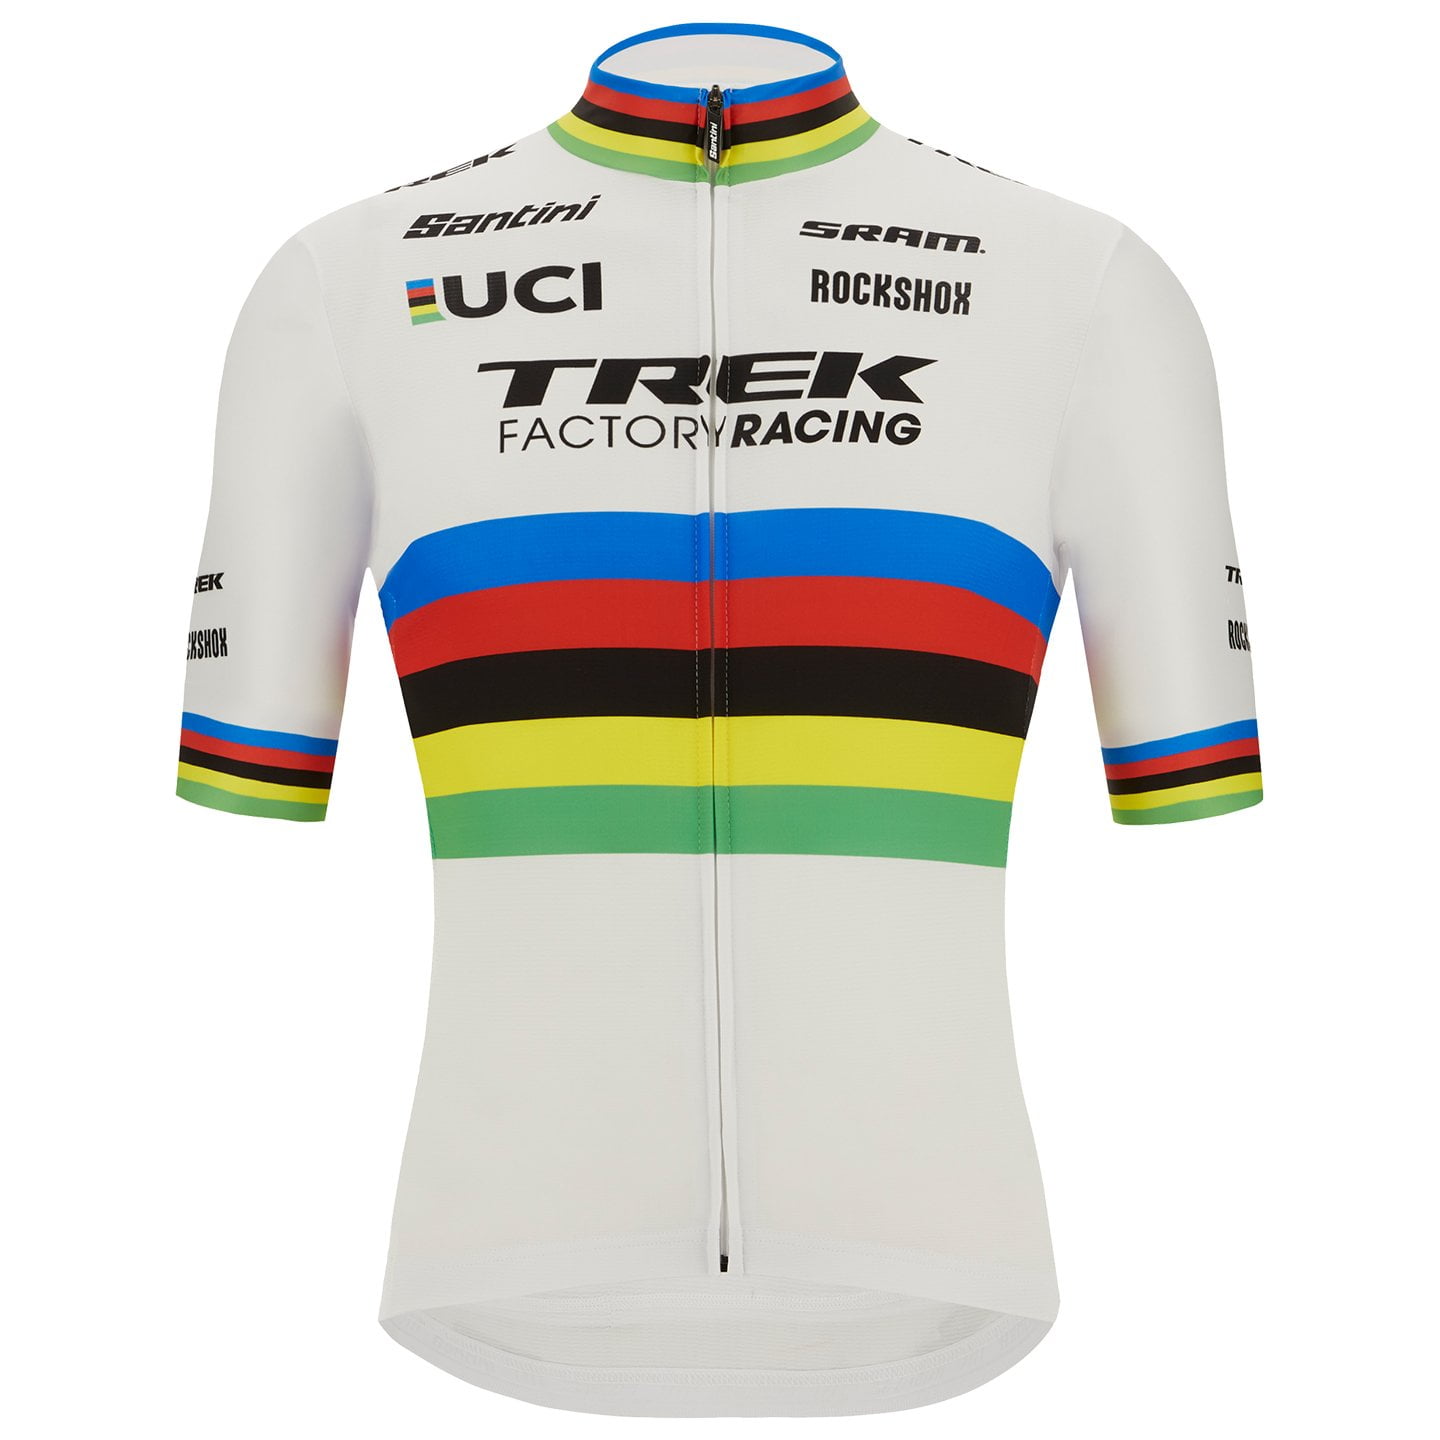 TREK FACTORY RACING XC World Champion 2022 Short Sleeve Jersey, for men, size L, Cycling shirt, Cycle clothing